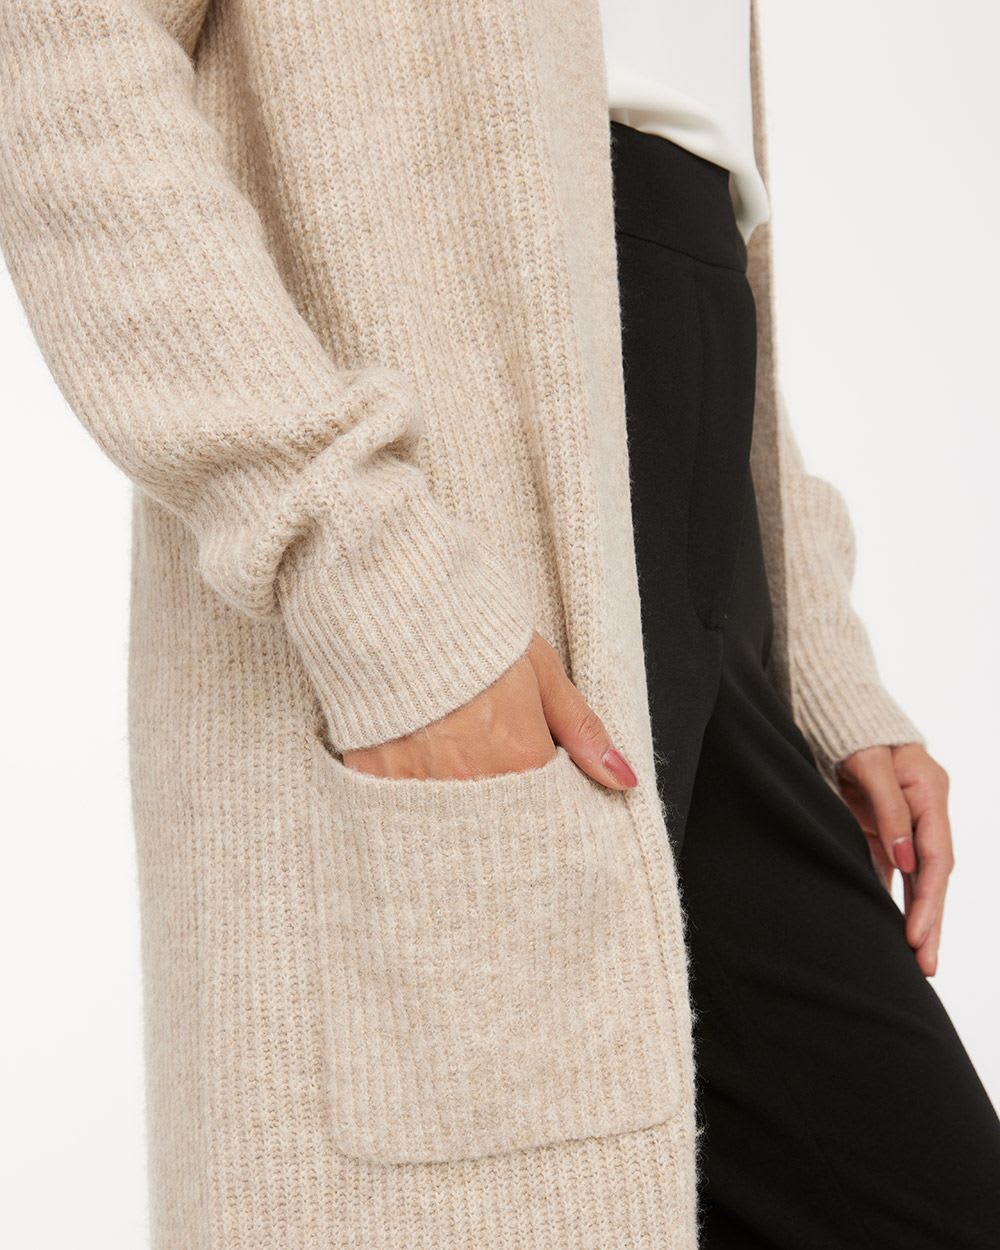 Long Open Cardigan with Front Pockets